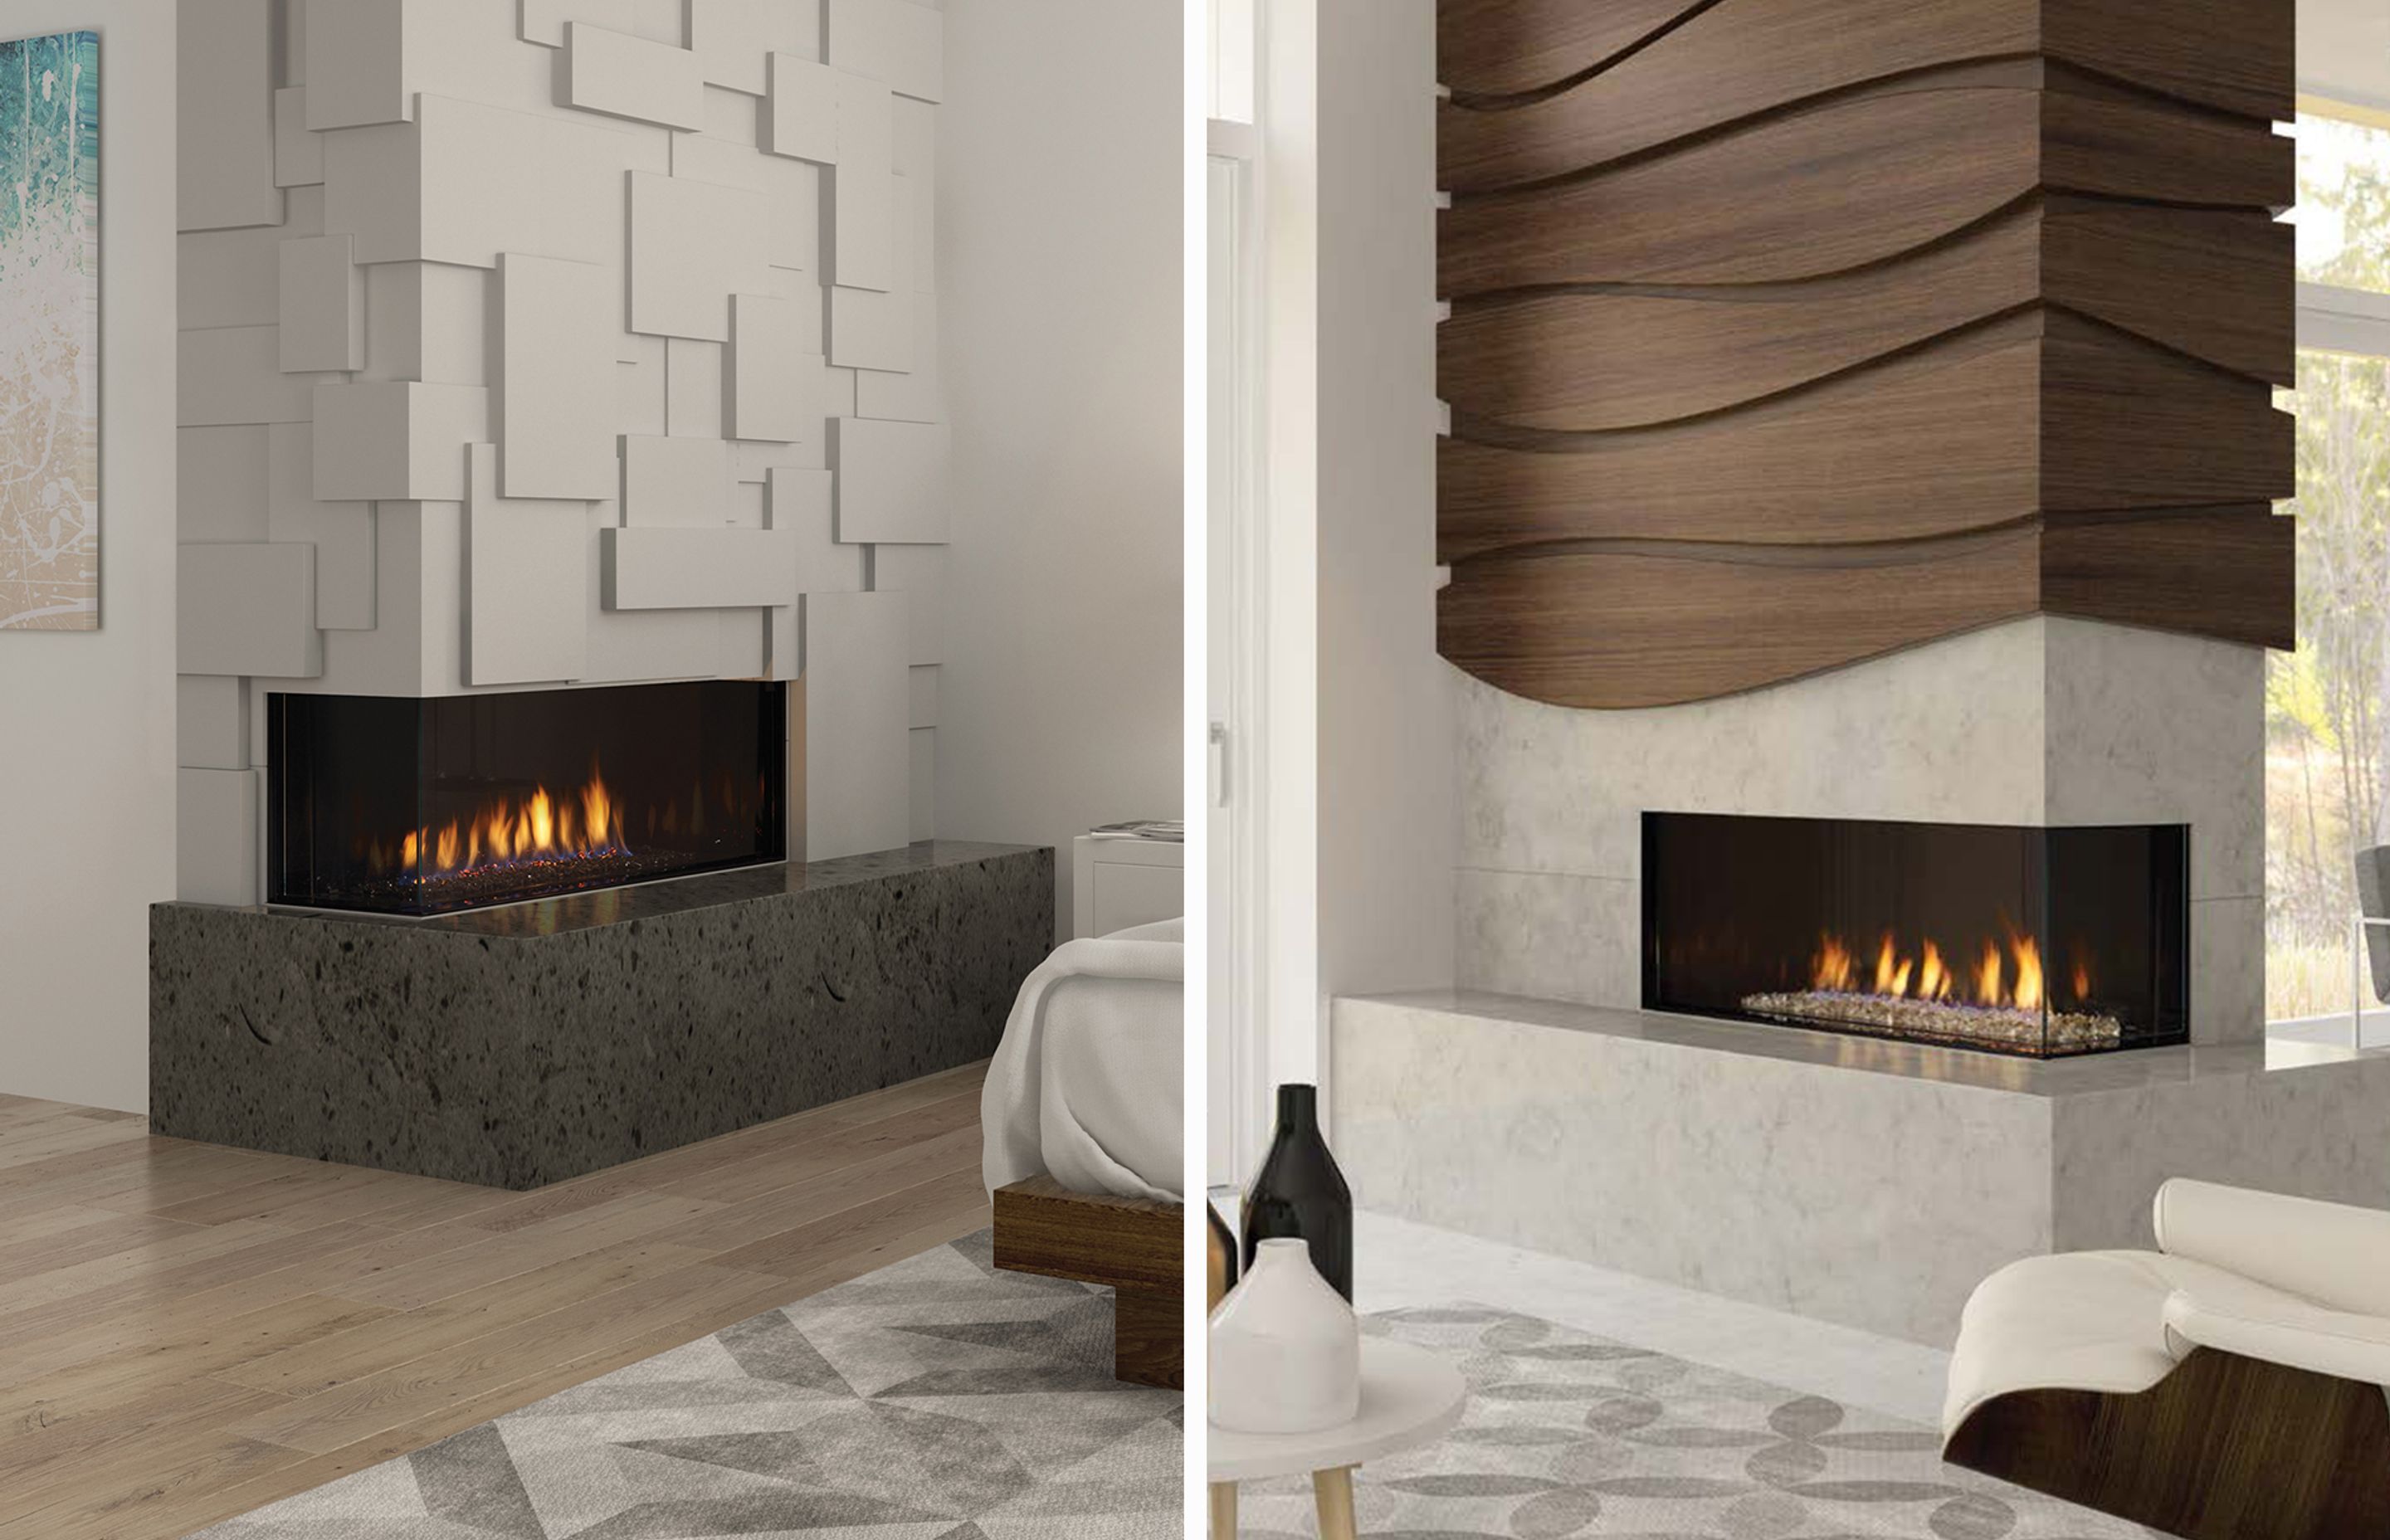 The Chicago double-sided fireplace comes in left- or right-hand options.